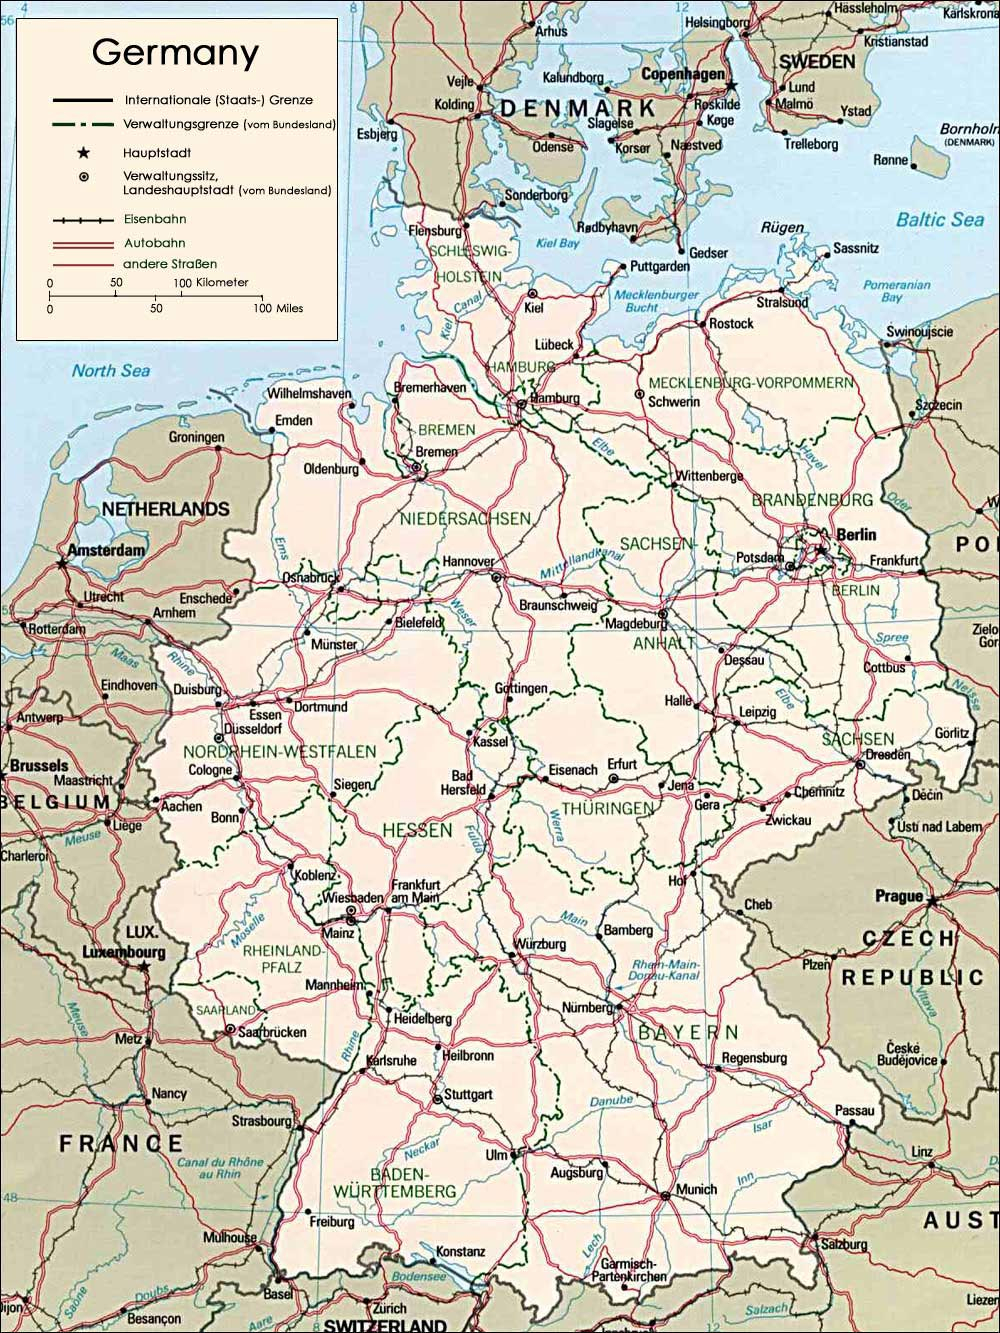 Germany Maps | Printable Maps Of Germany For Download - Large Printable Map Of Germany